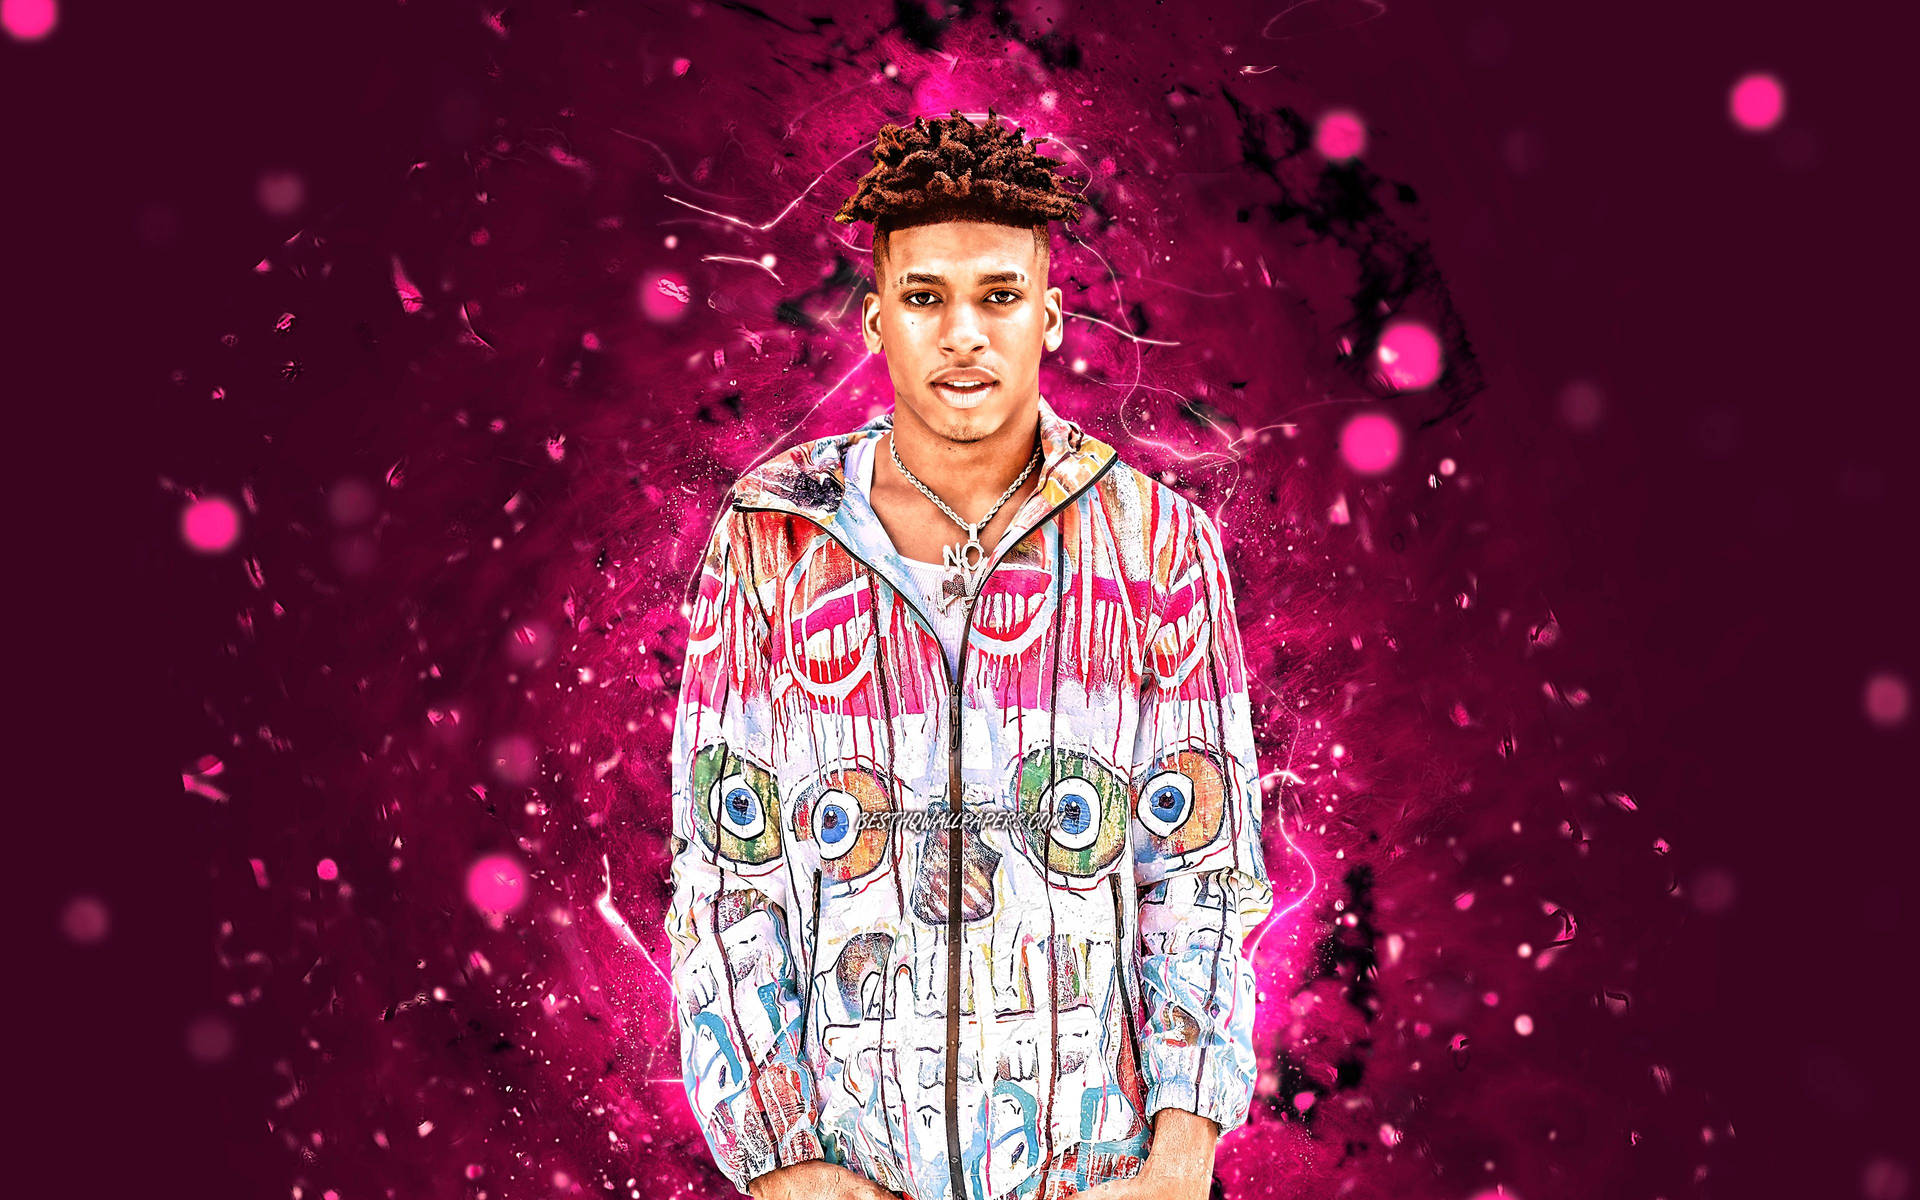 Nle Choppa bringing us something special with a pink aesthetic Wallpaper